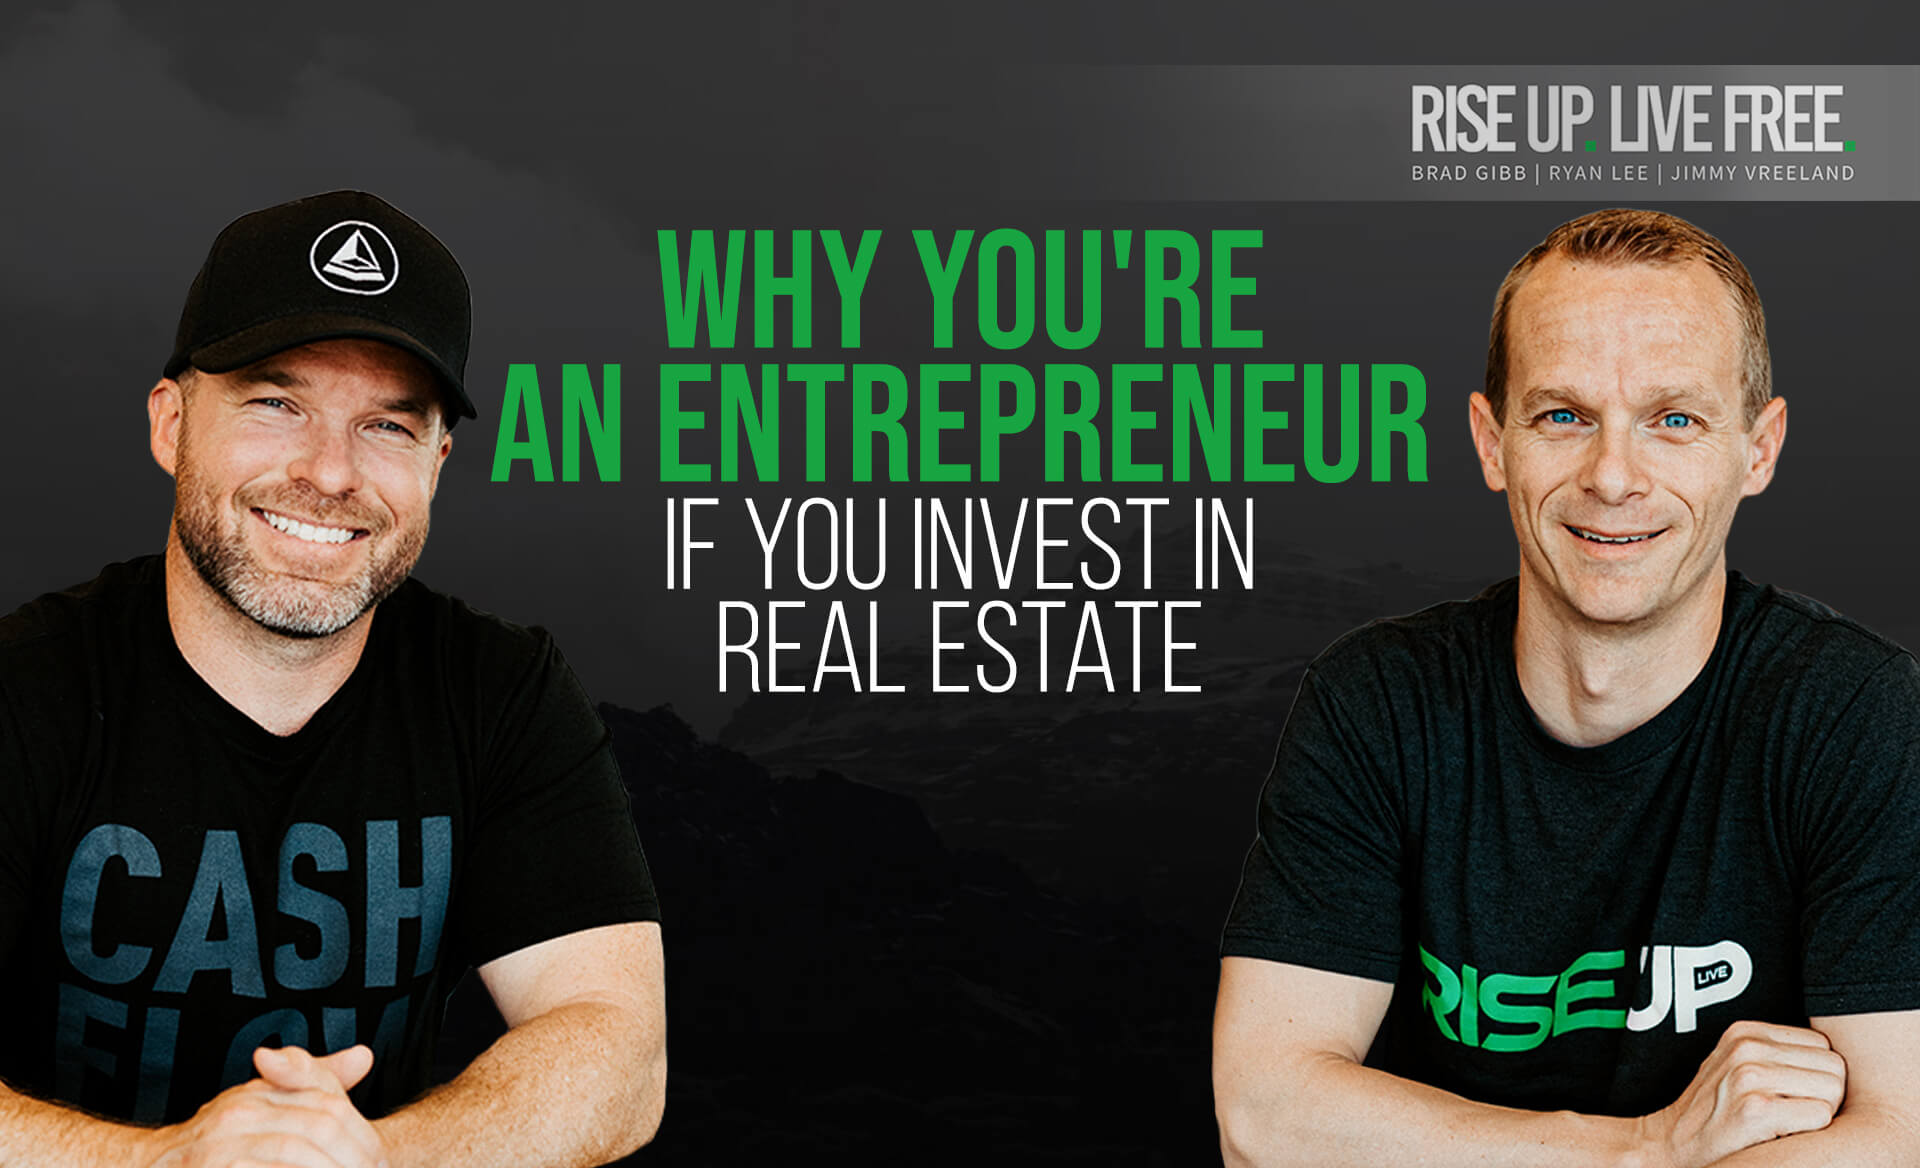 Why You’re an Entrepreneur if You Invest in Real Estate